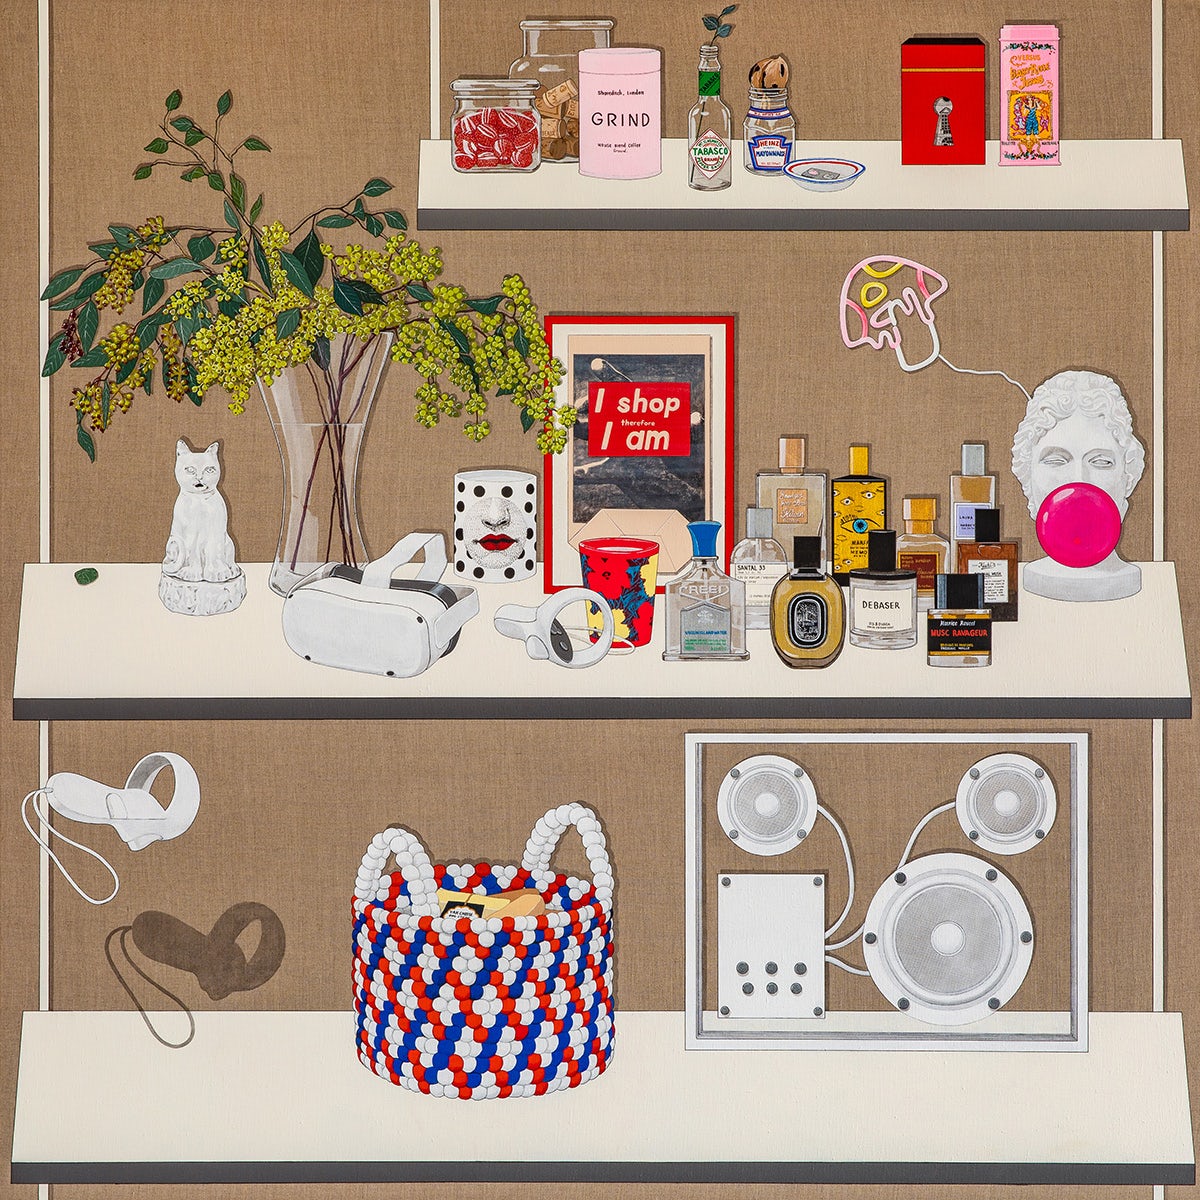 Painting by Sooyoung Chung showing a vase of flowers, pefume bottles, a basket, and other objects arranged across three shelves